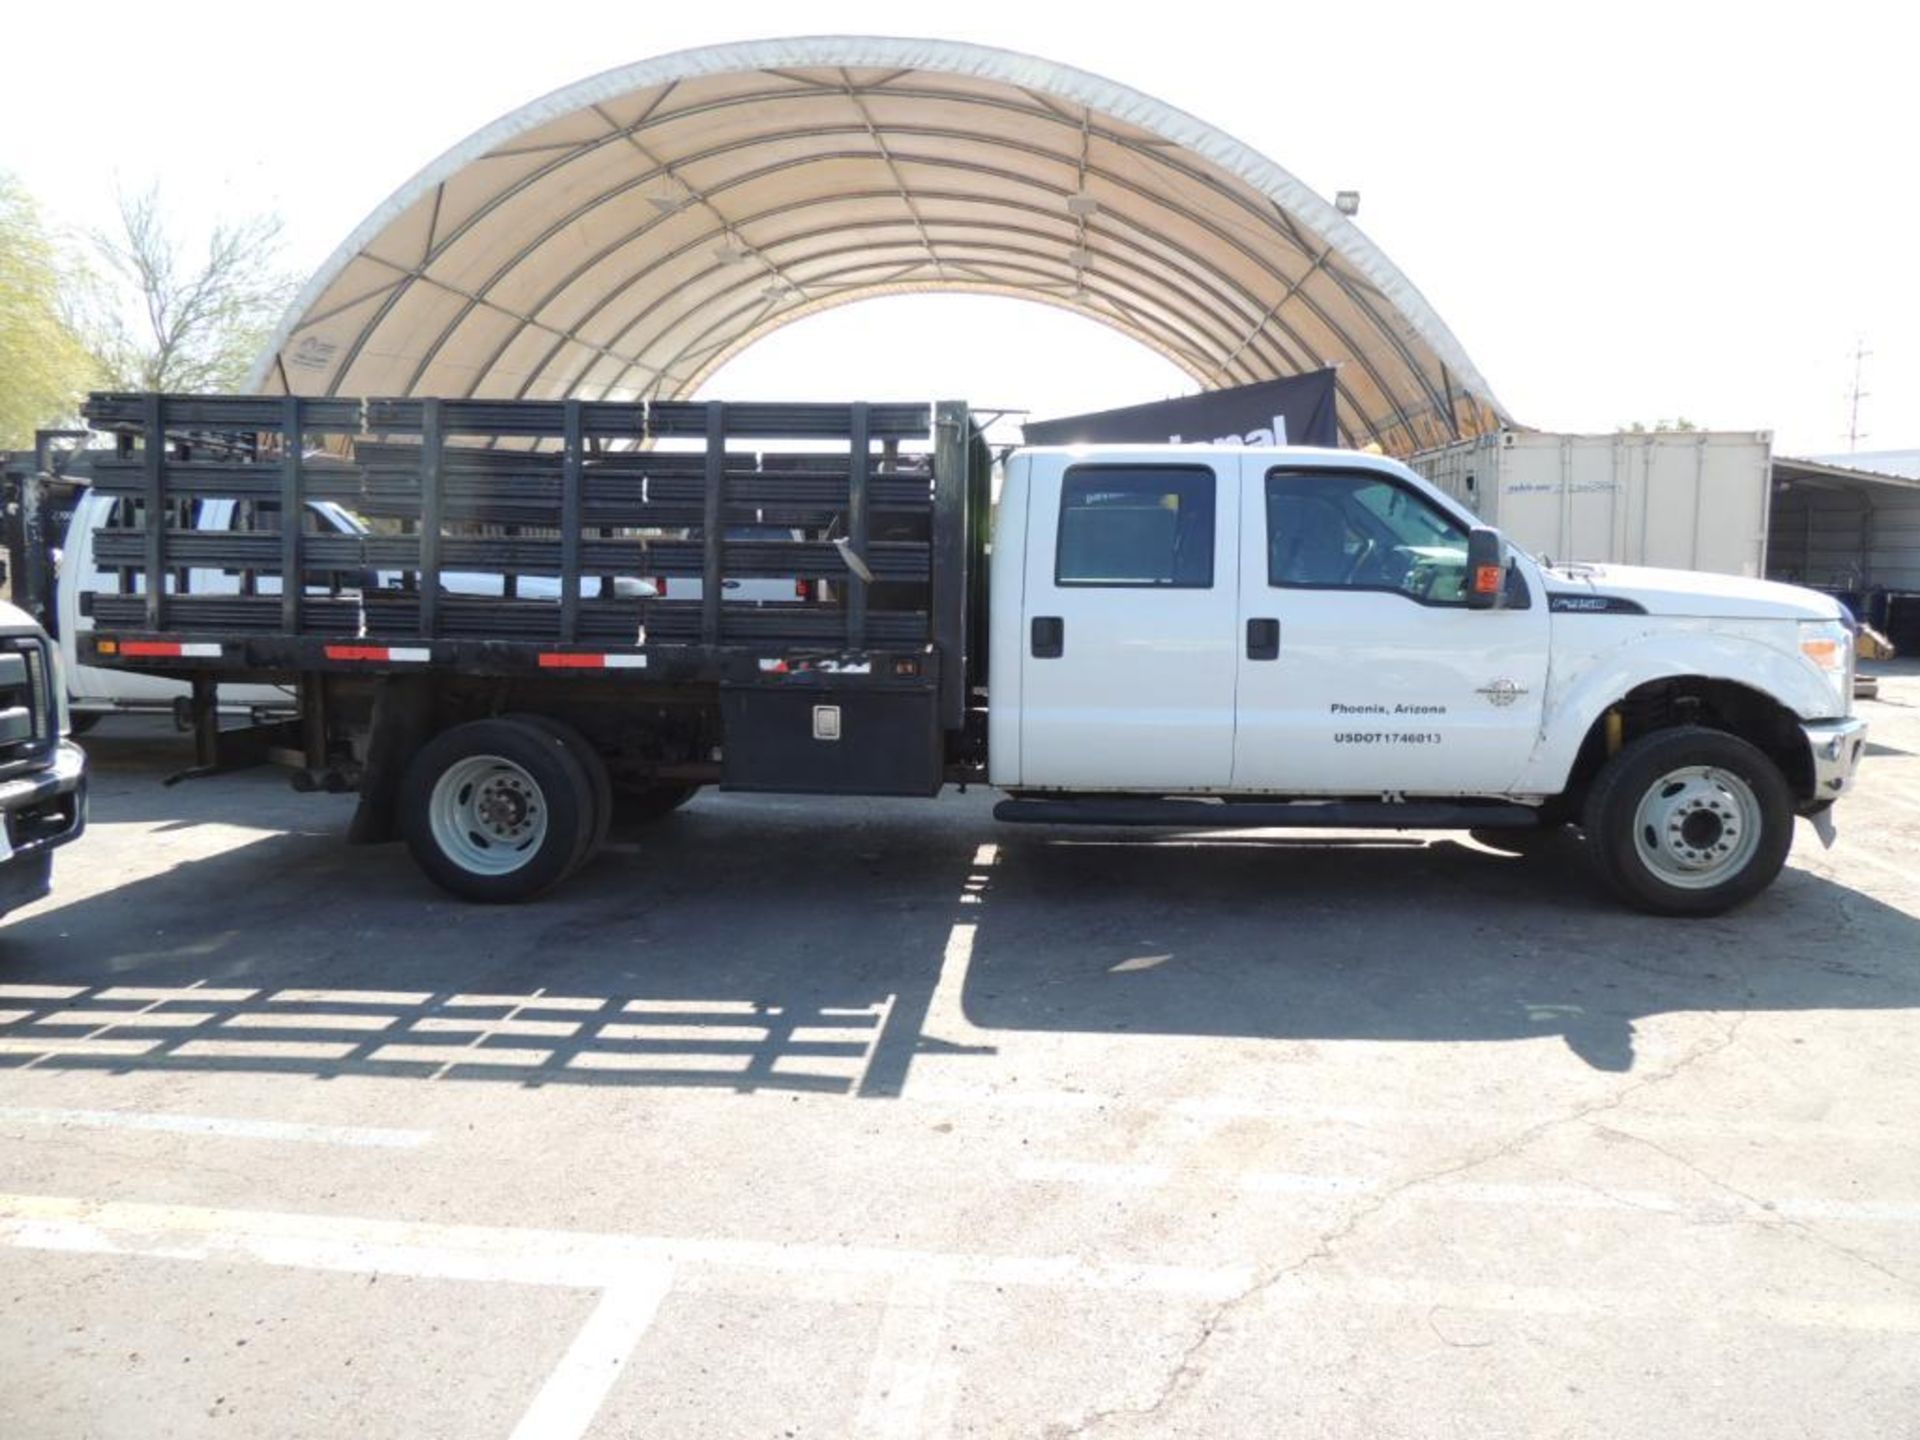 2016 Ford F450 XL SD Crew Cab 12 ft. Flatbed, VIN # 1FD0W4GT2GEC53691, 6.7 Ltr. Auto Trans, 100 Gal. - Image 3 of 5